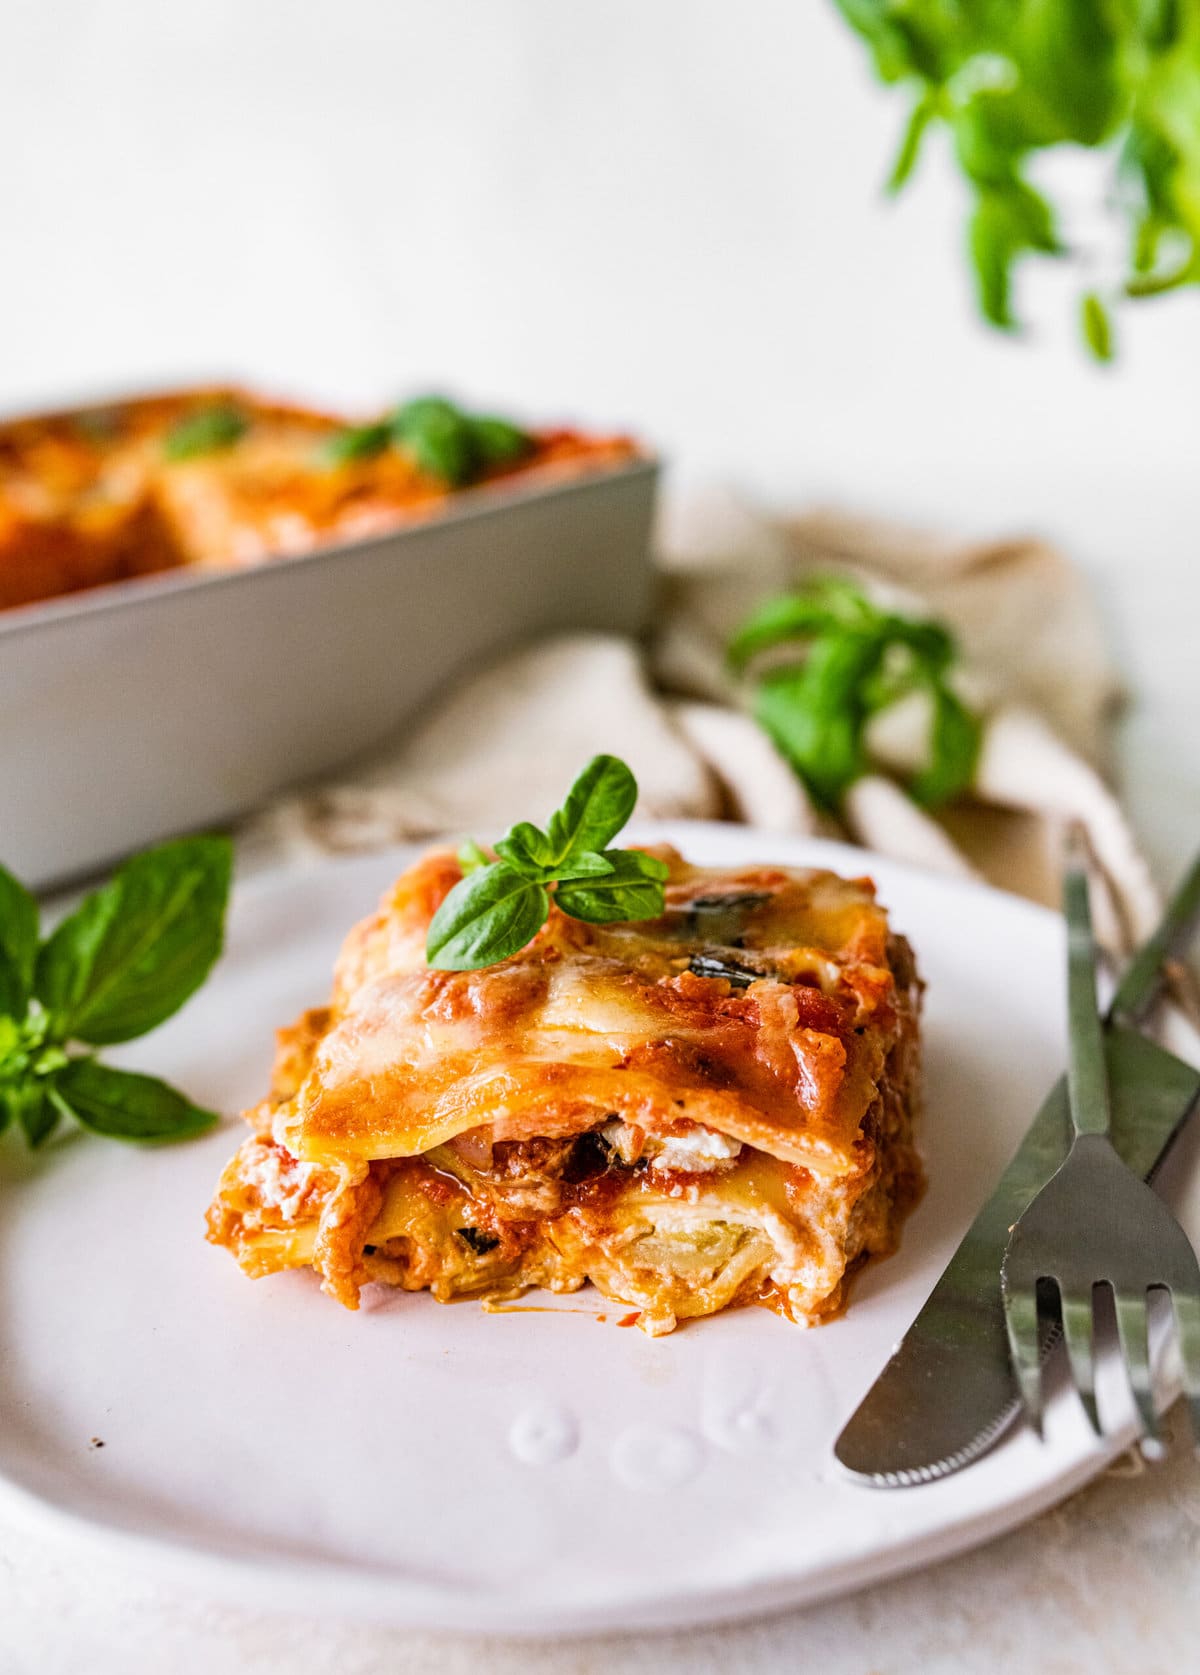 Easy Mediterranean Lasagna slice on a plate ready to eat. Fork and knife on the plate.